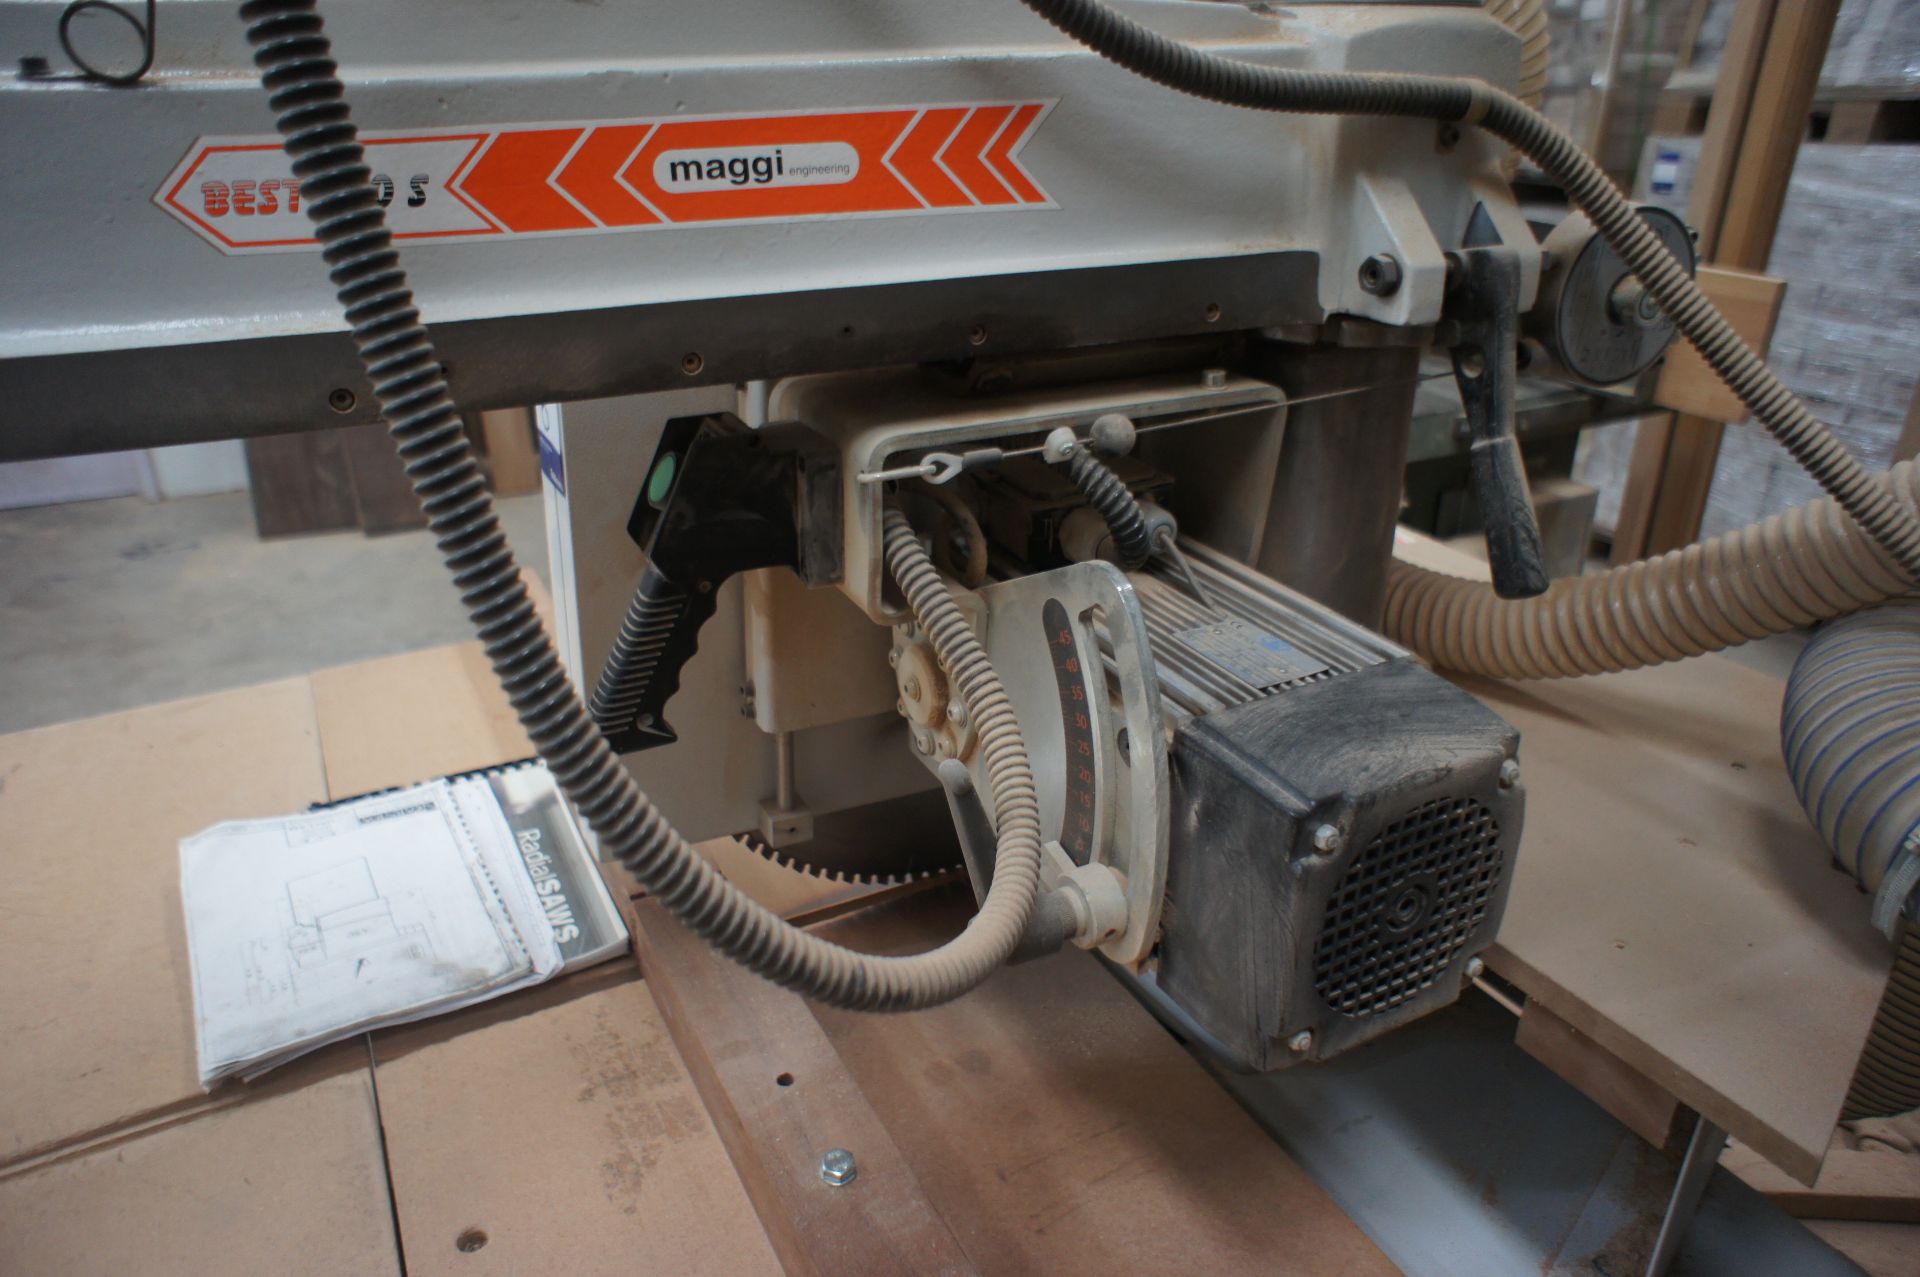 Maggi Best 700S Radial Arm Saw, 550mm blade, serial number 56840201, year of manufacture 2005 ( - Image 3 of 4